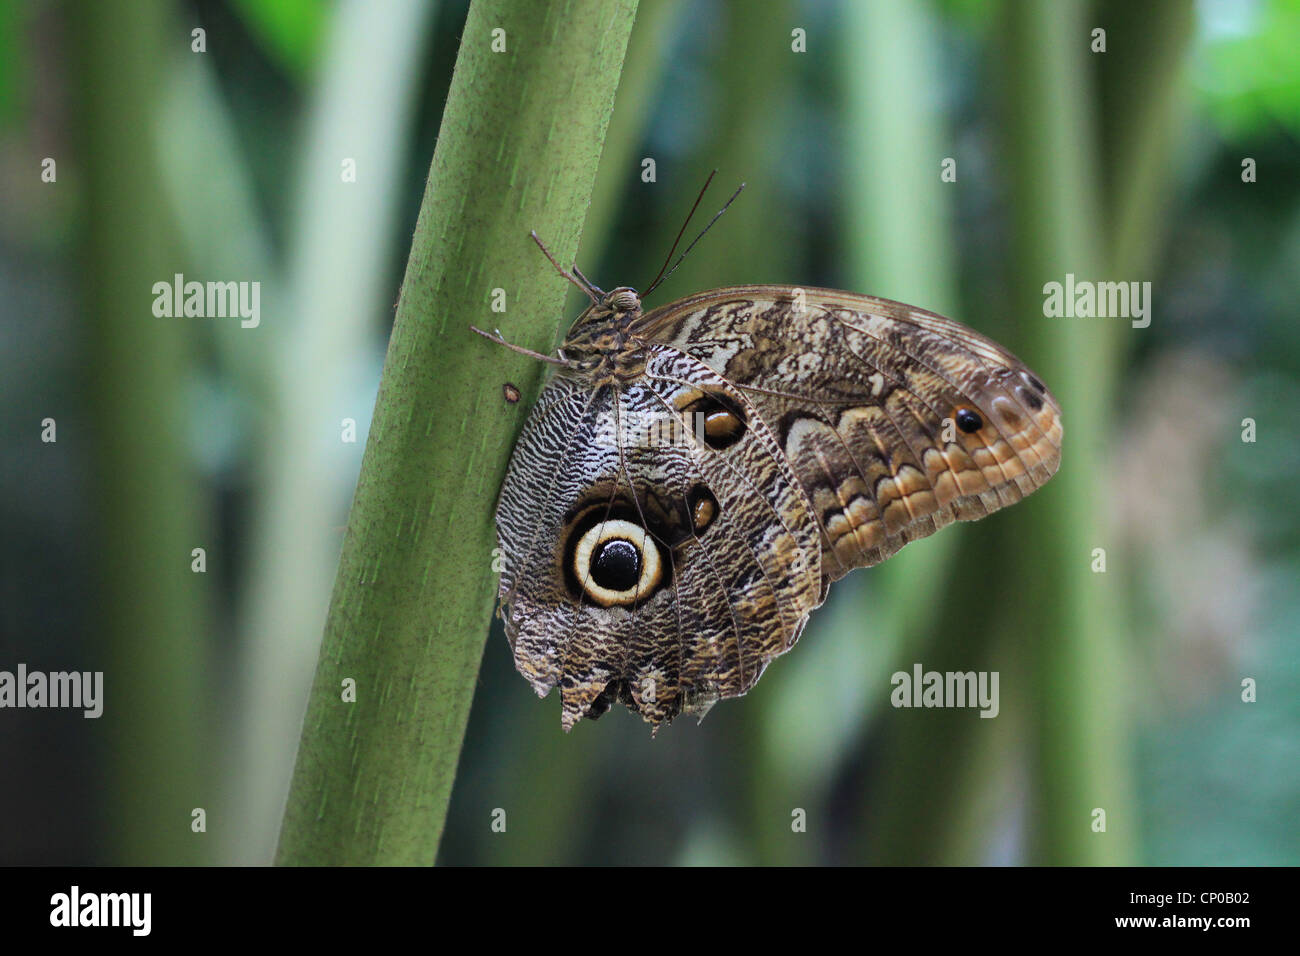 An owl butterfly (Caligo eurilochus) lingering on a plant. It's found in the rain forests of Mexico, Central and South America. Stock Photo